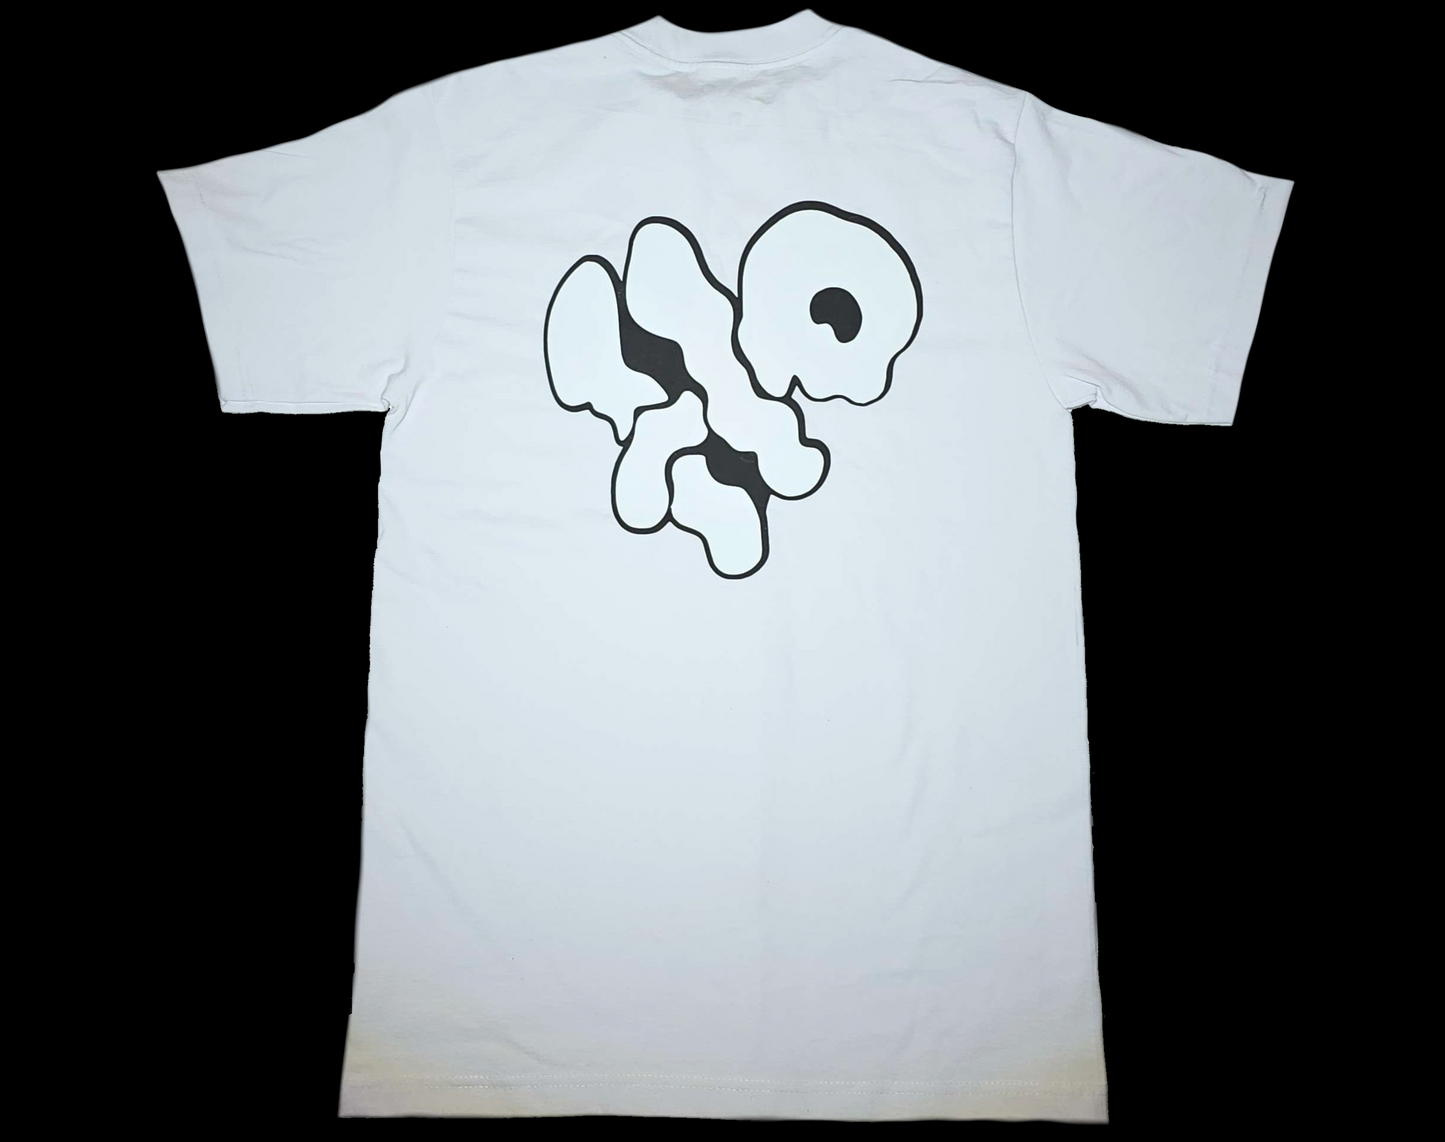 White Highest Potential Tee